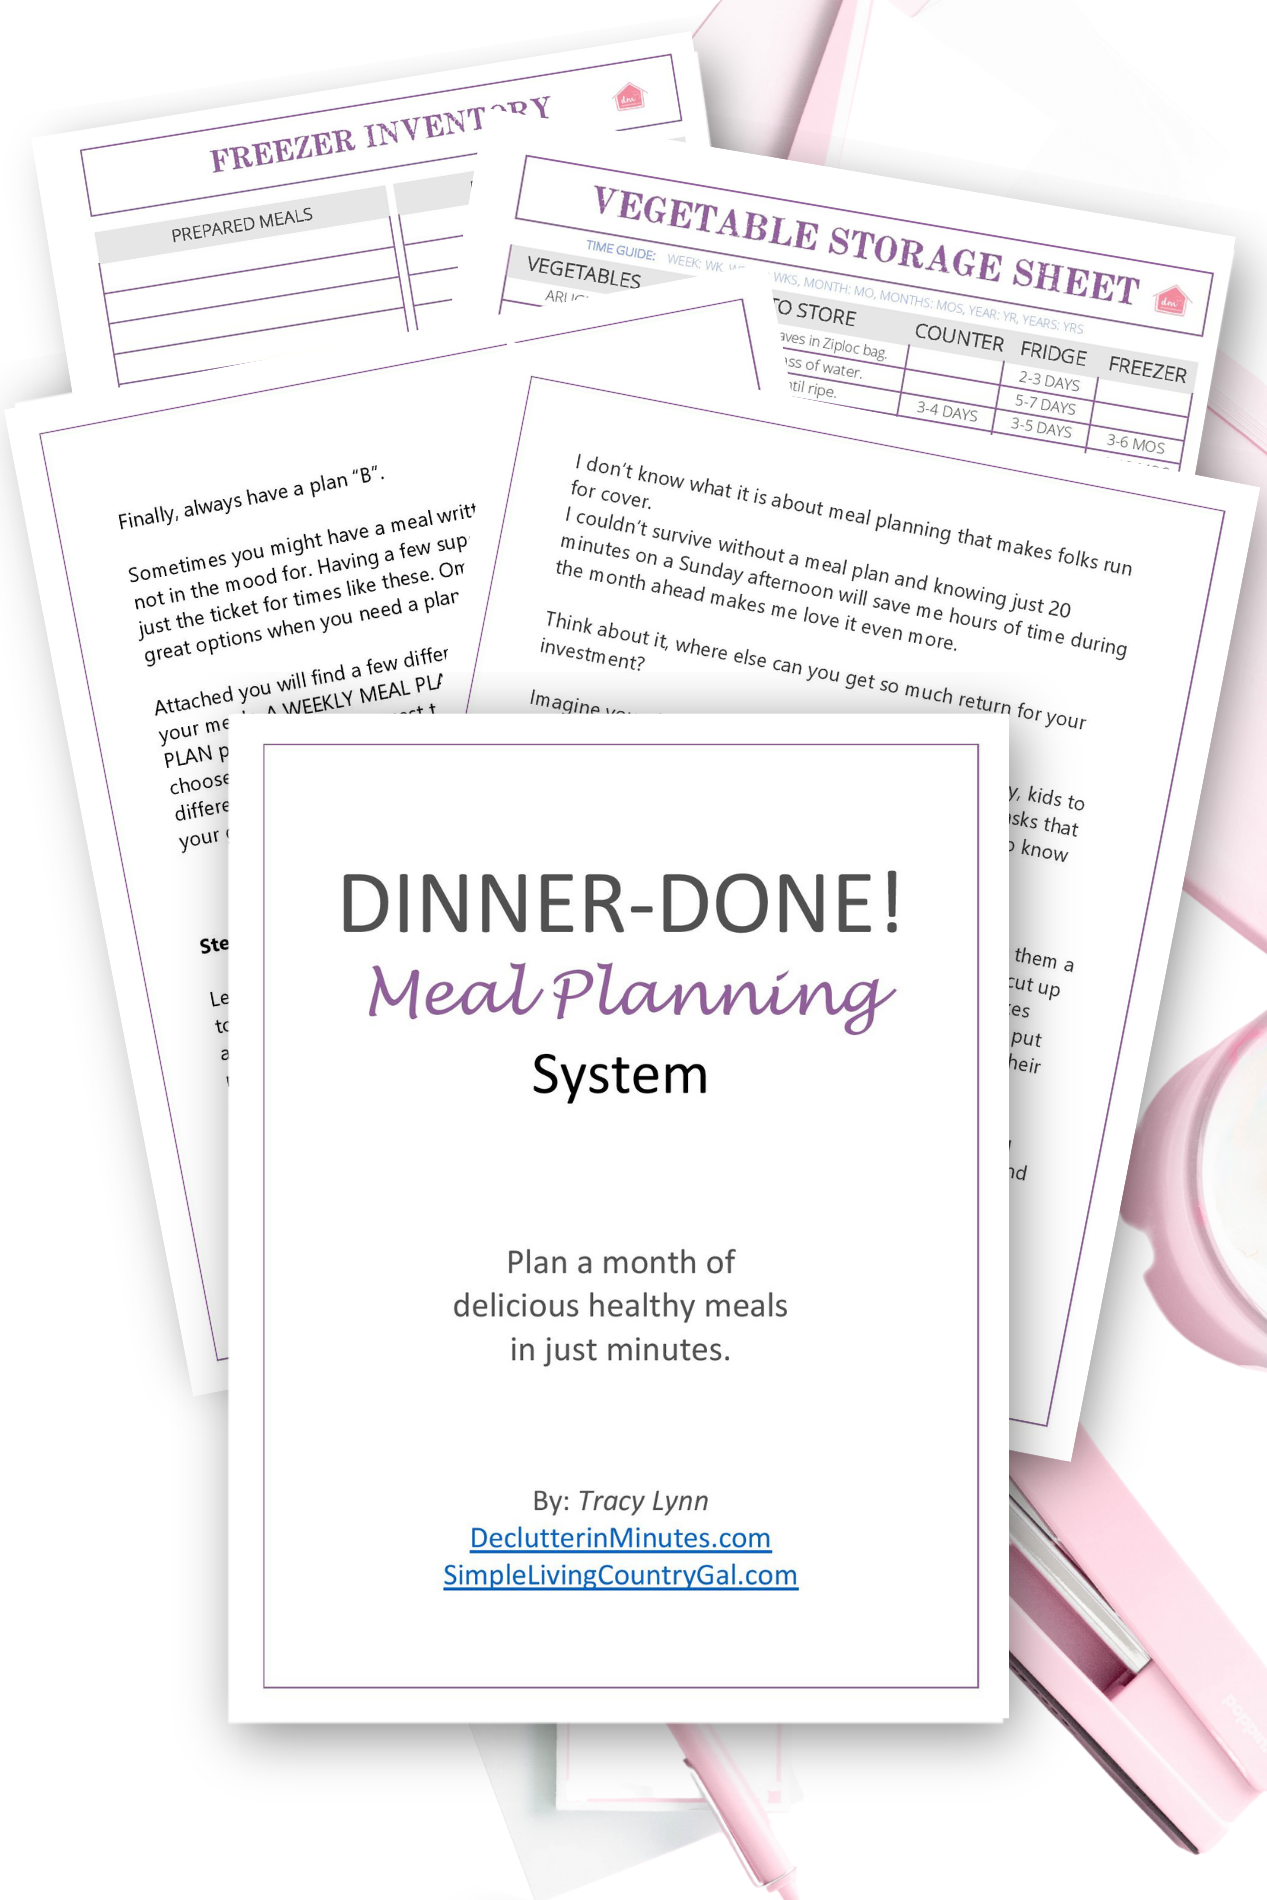 DINNER-DONE! Meal Planning System